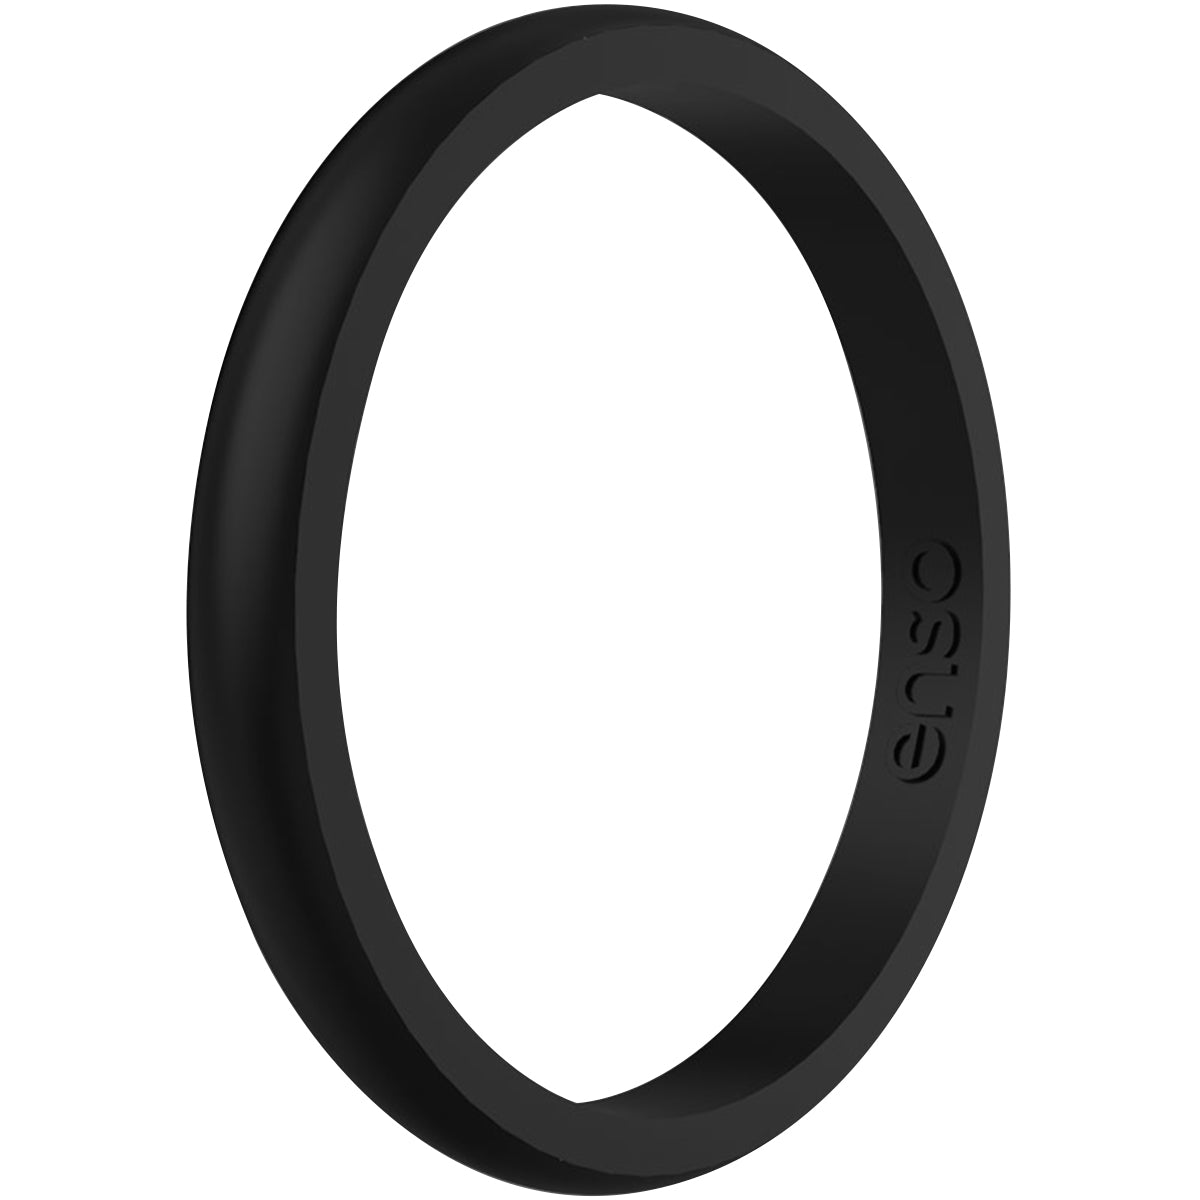 Enso Rings Halo Elements Series Silicone Ring - Black Pearl Enso Rings